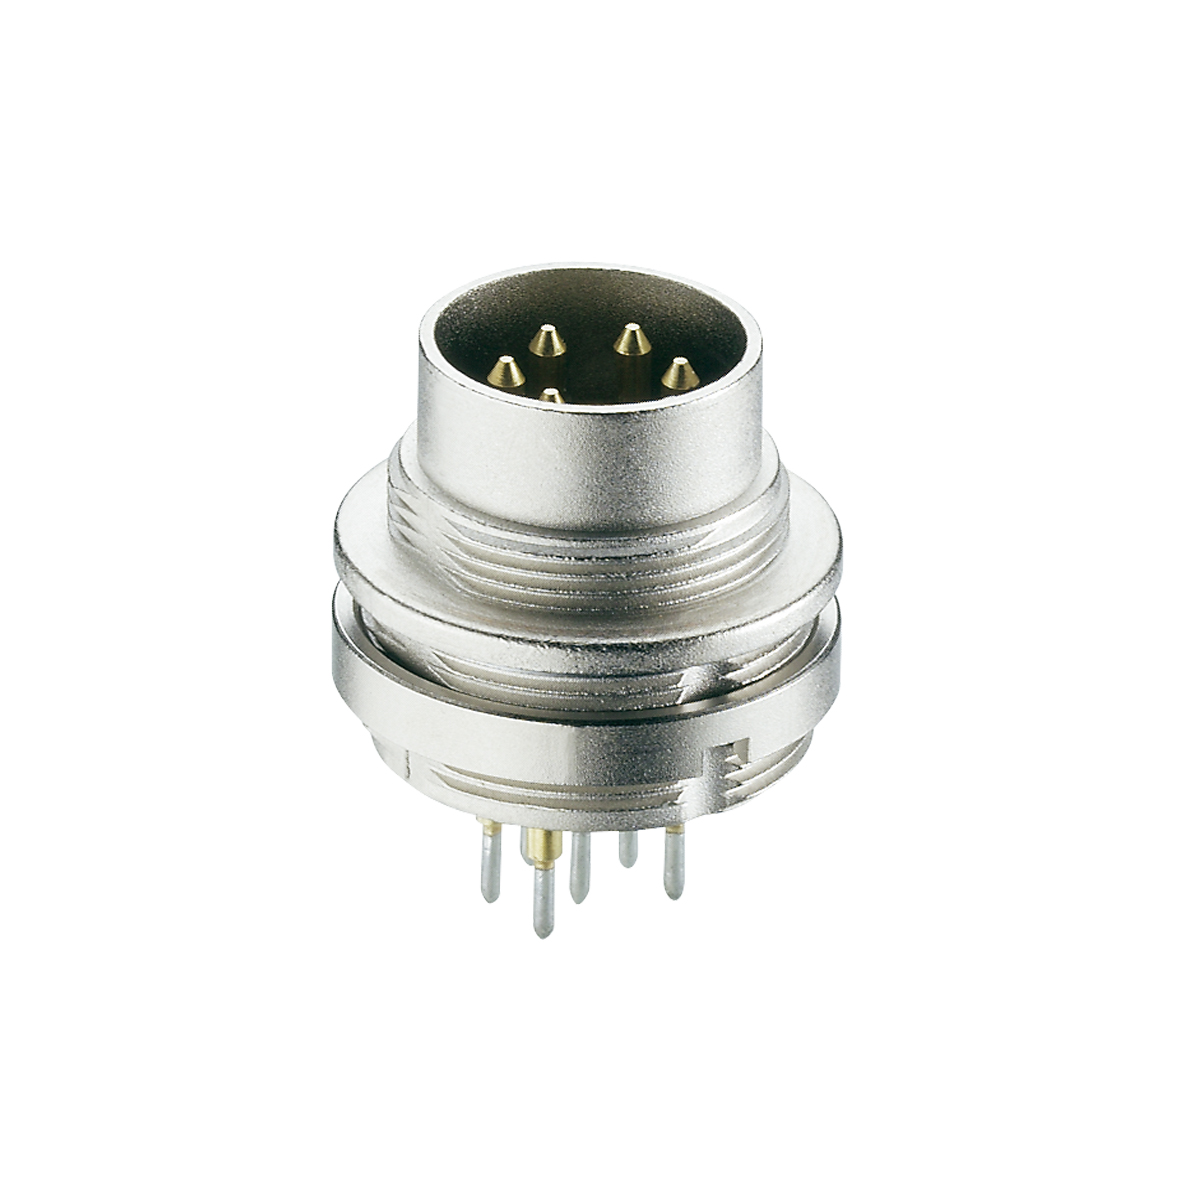 Lumberg: 316 (Series 03 | Circular connectors with threaded joint M16 acc. to IEC 61076-2-106, IP40/IP68)